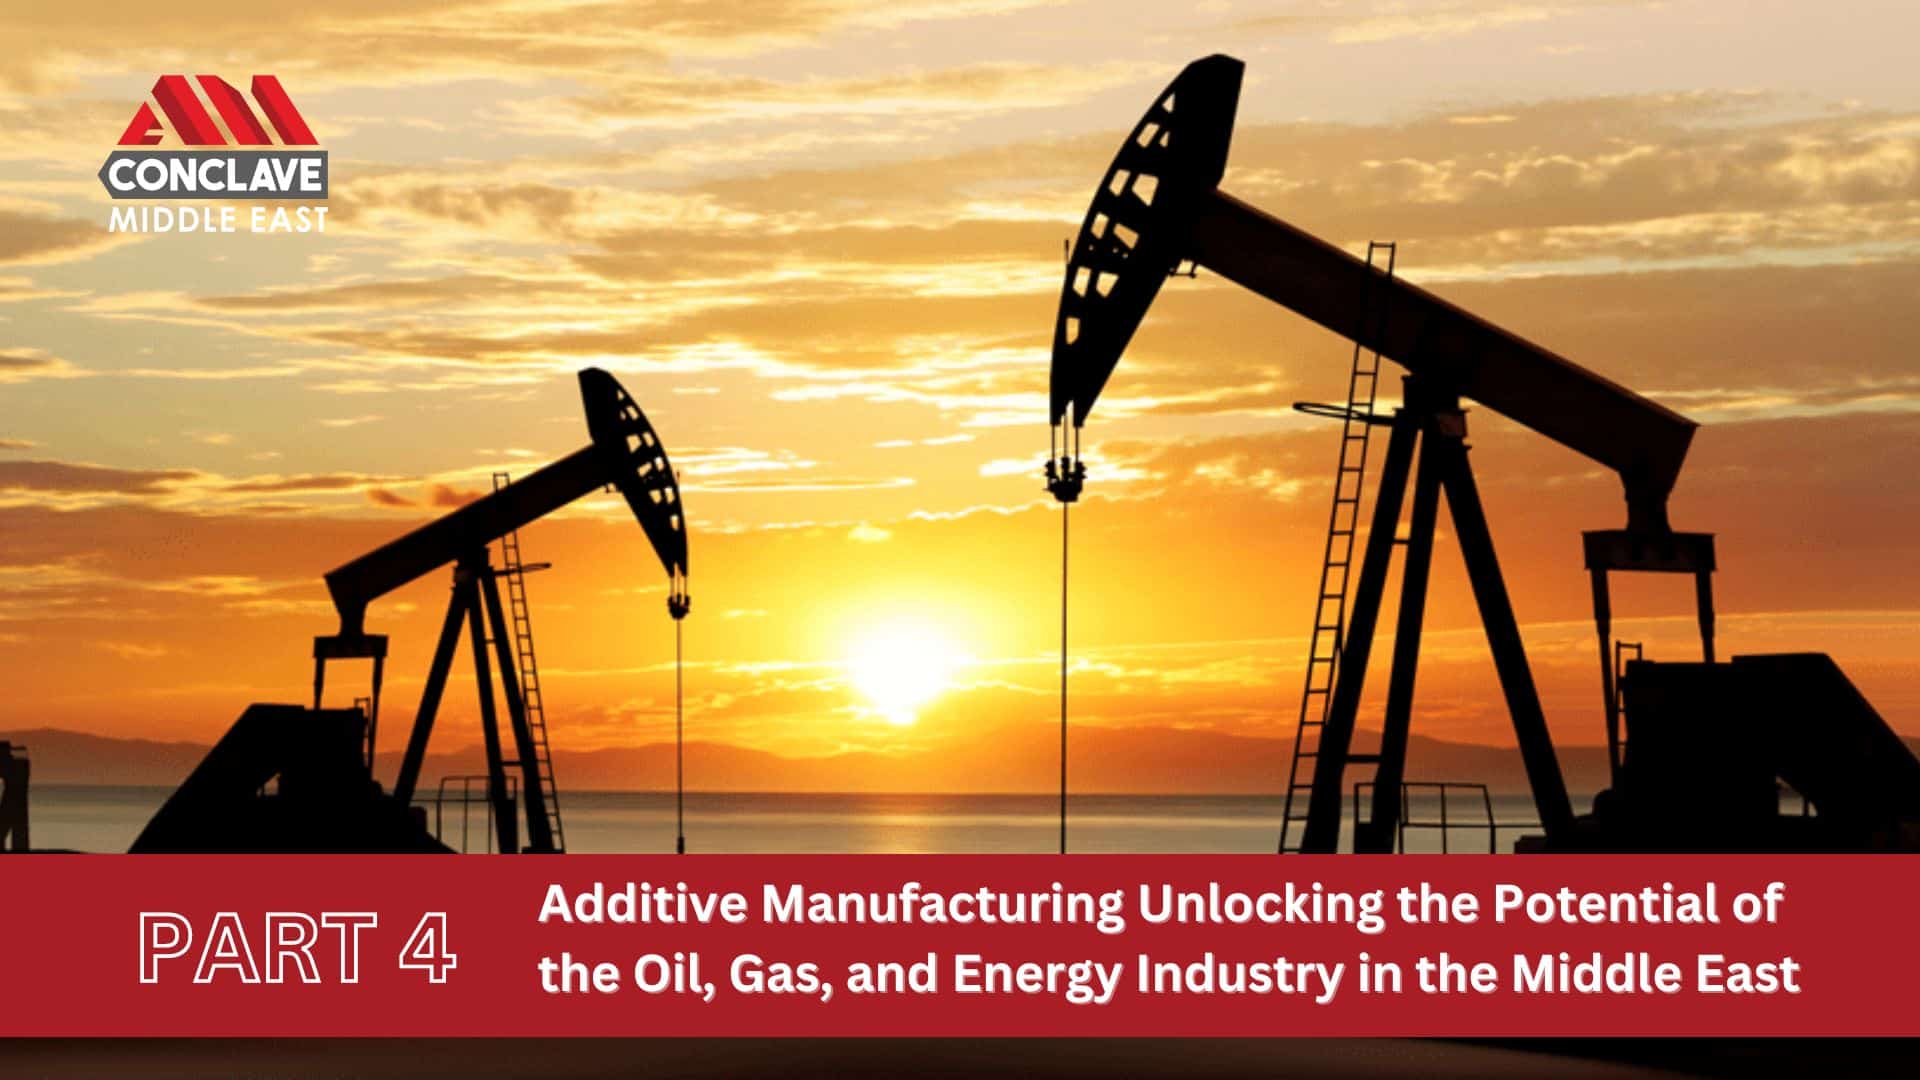 Additive Manufacturing Unlocking the Potential of the Oil, Gas, and Energy Industry in the Middle East